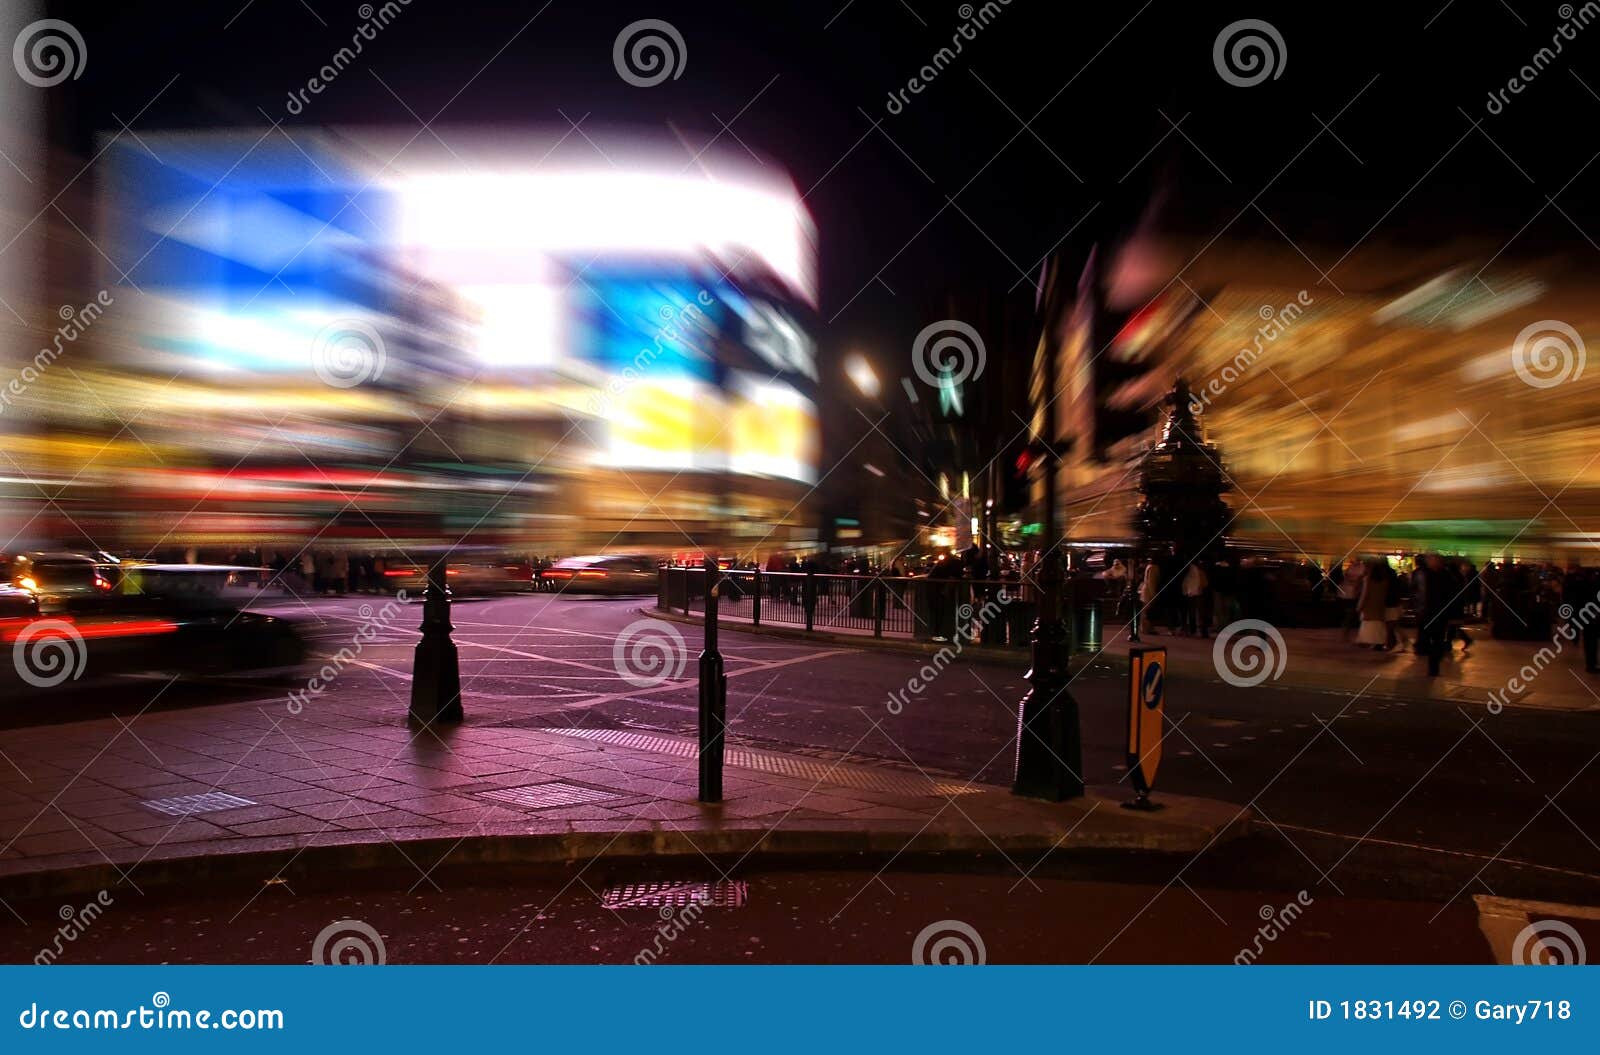 a night view of the piccadilly circus in london